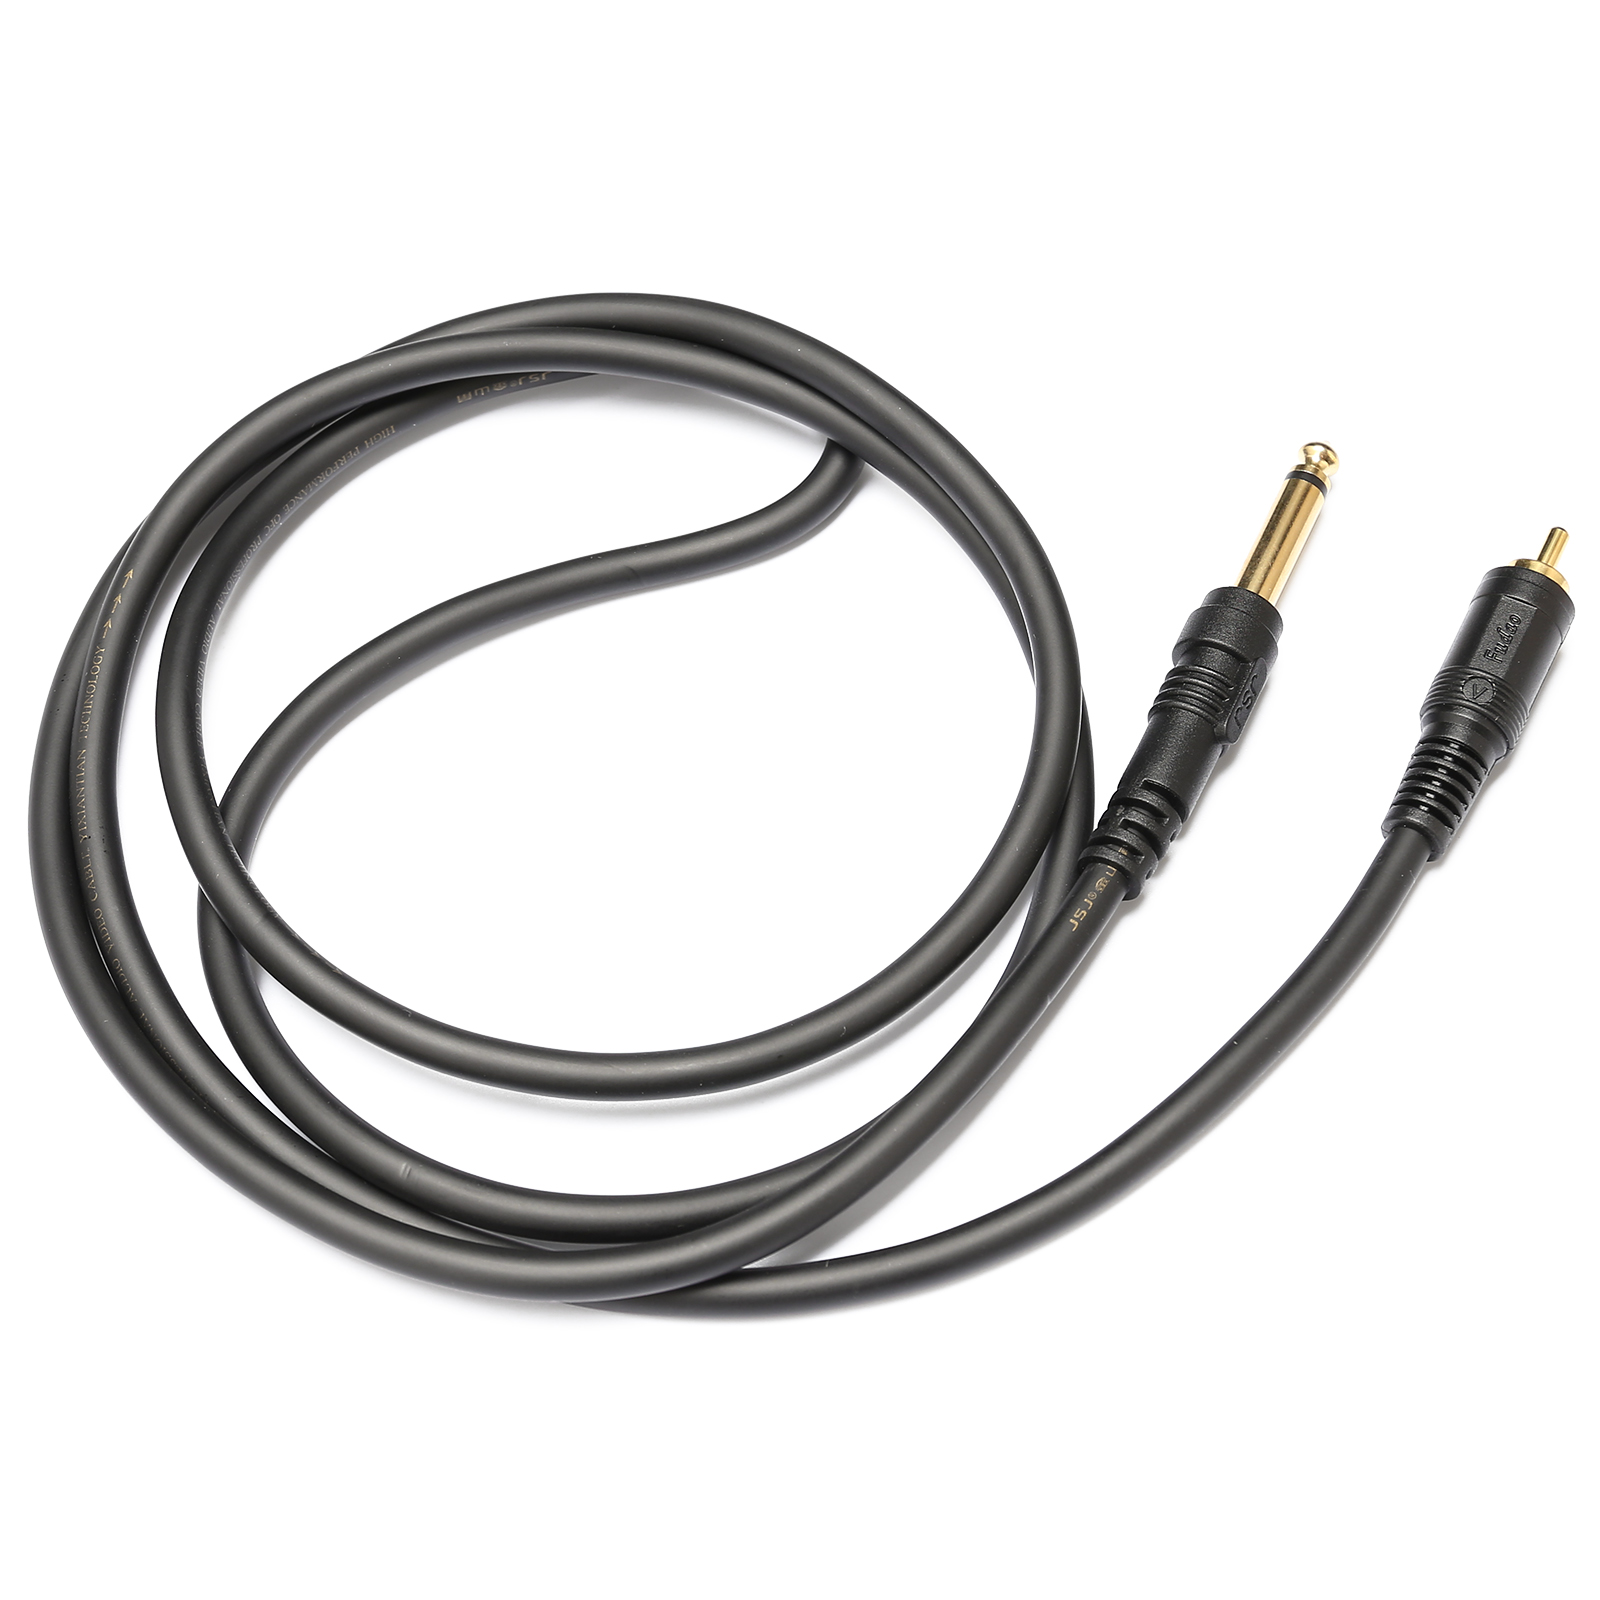 Top Male Audio Cable on the Market: Everything You Need to Know